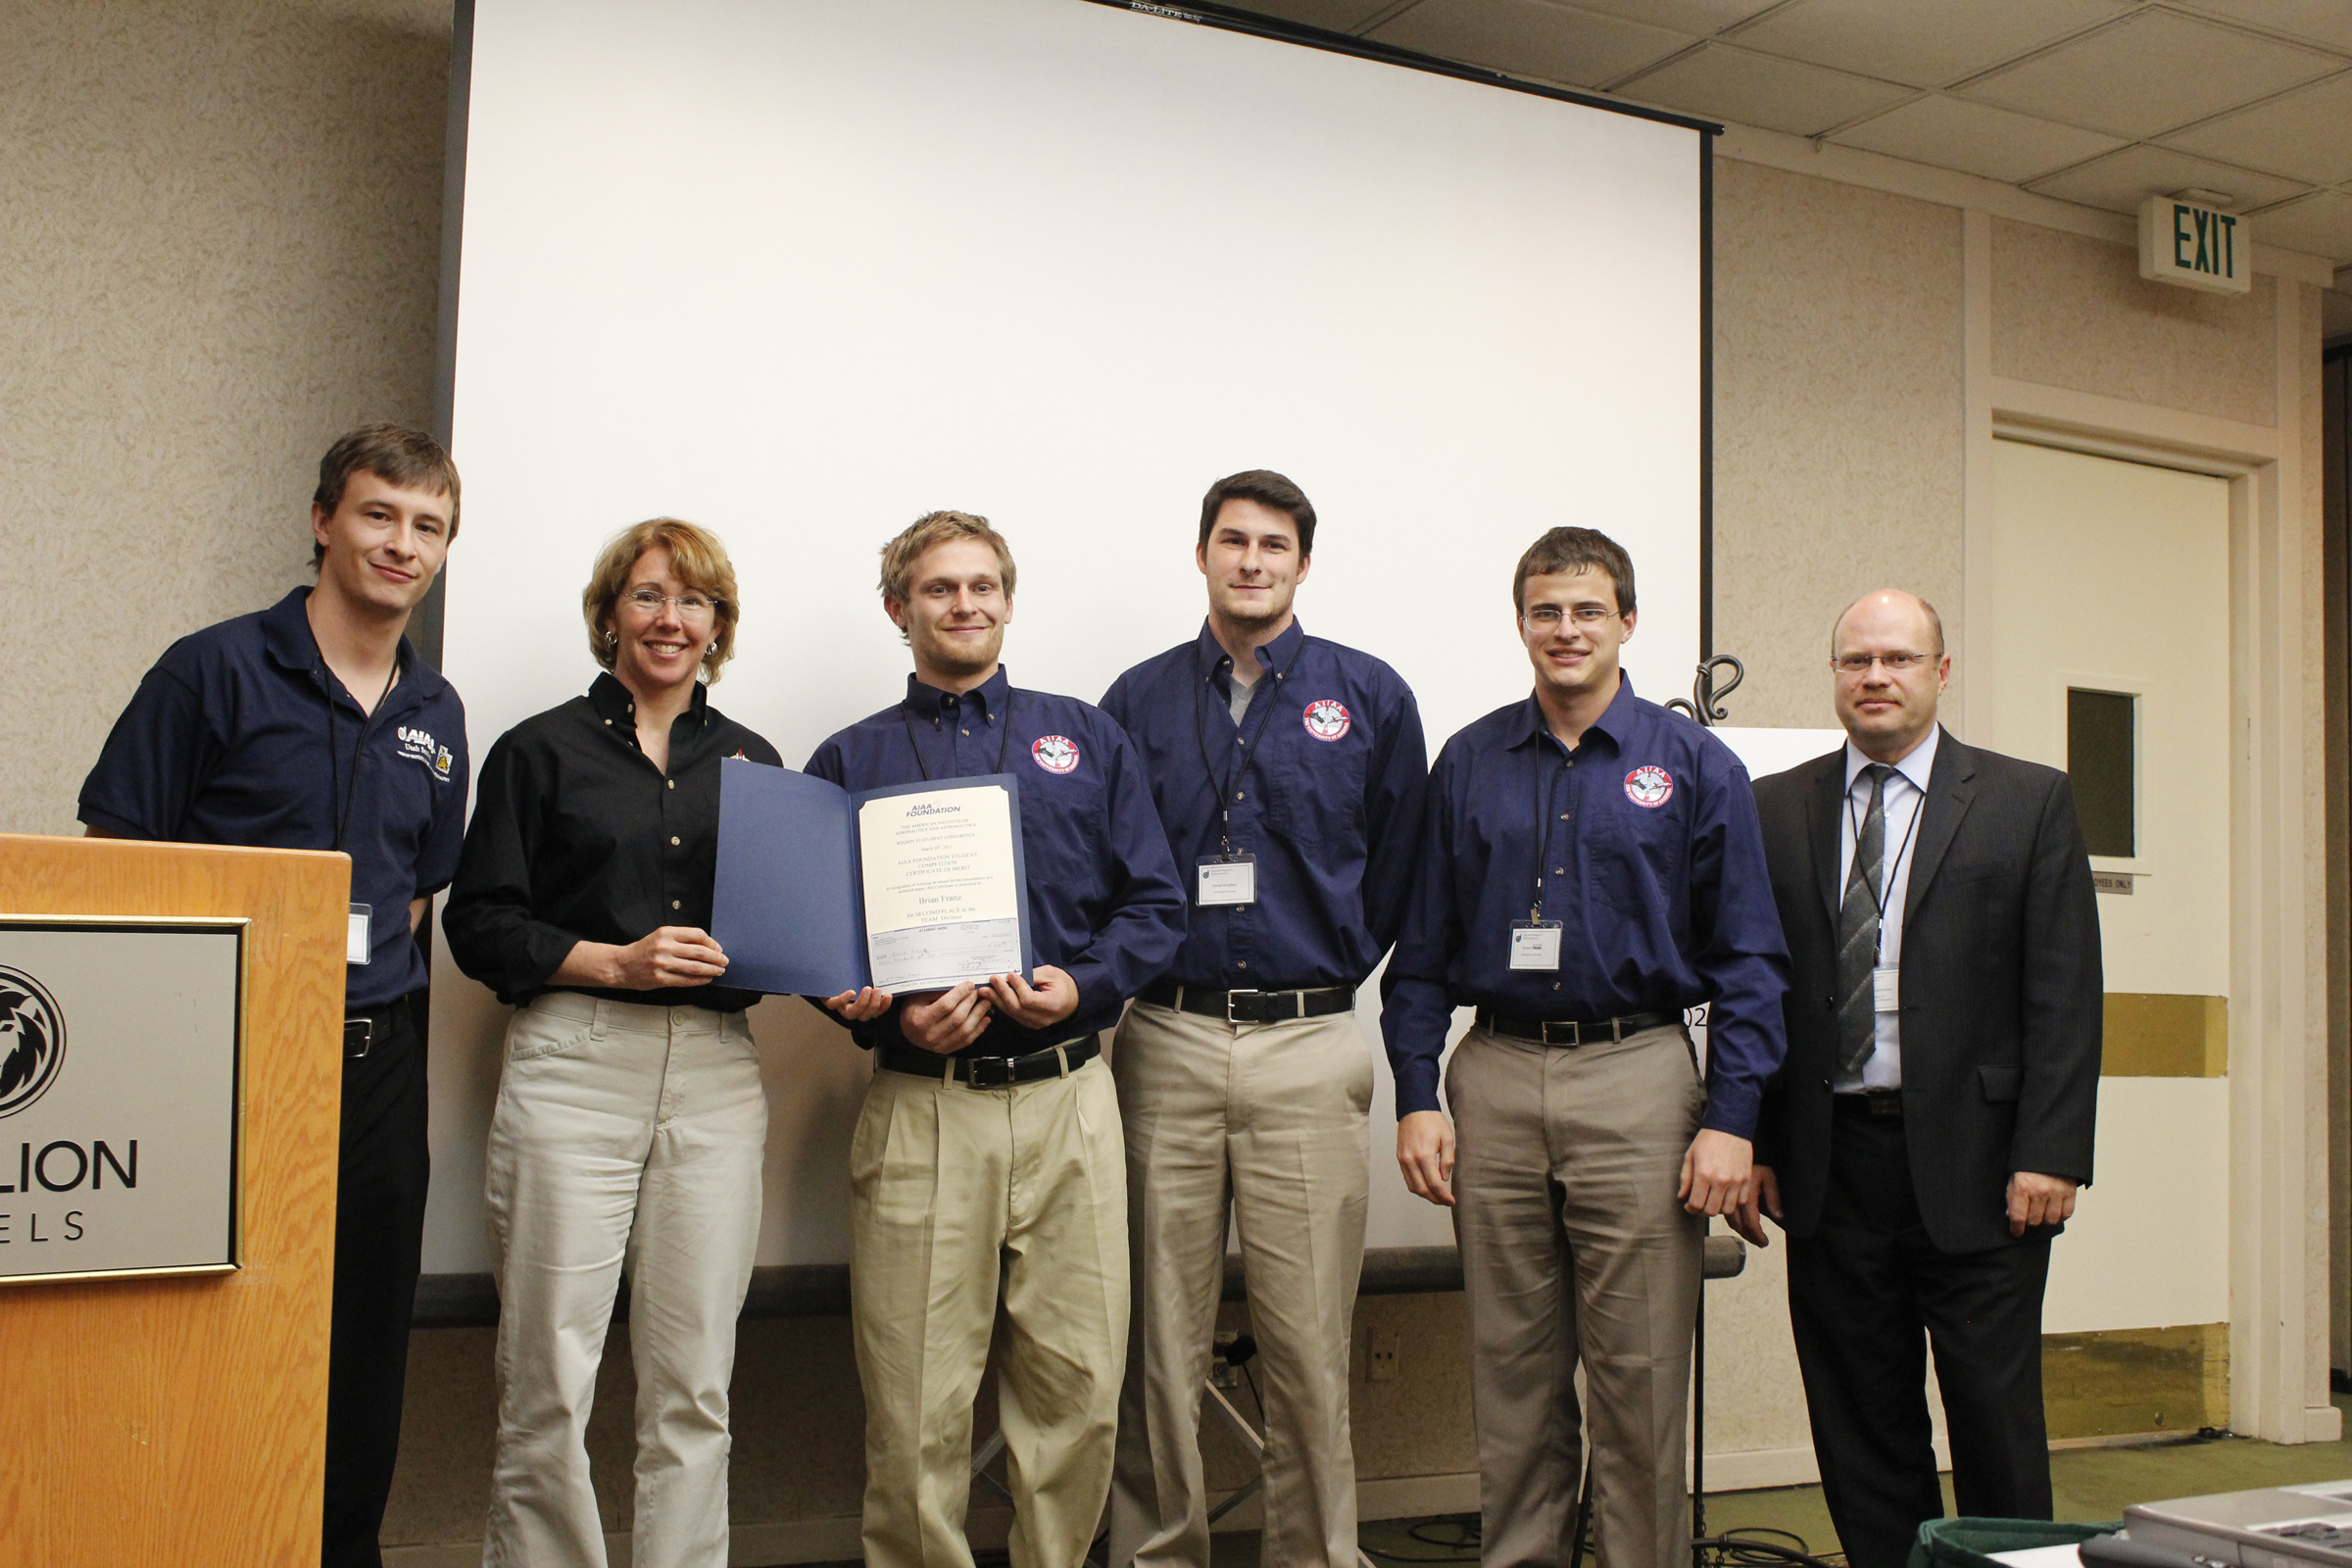 Congrats on 2nd place in AIAA Student Team Papers Competition